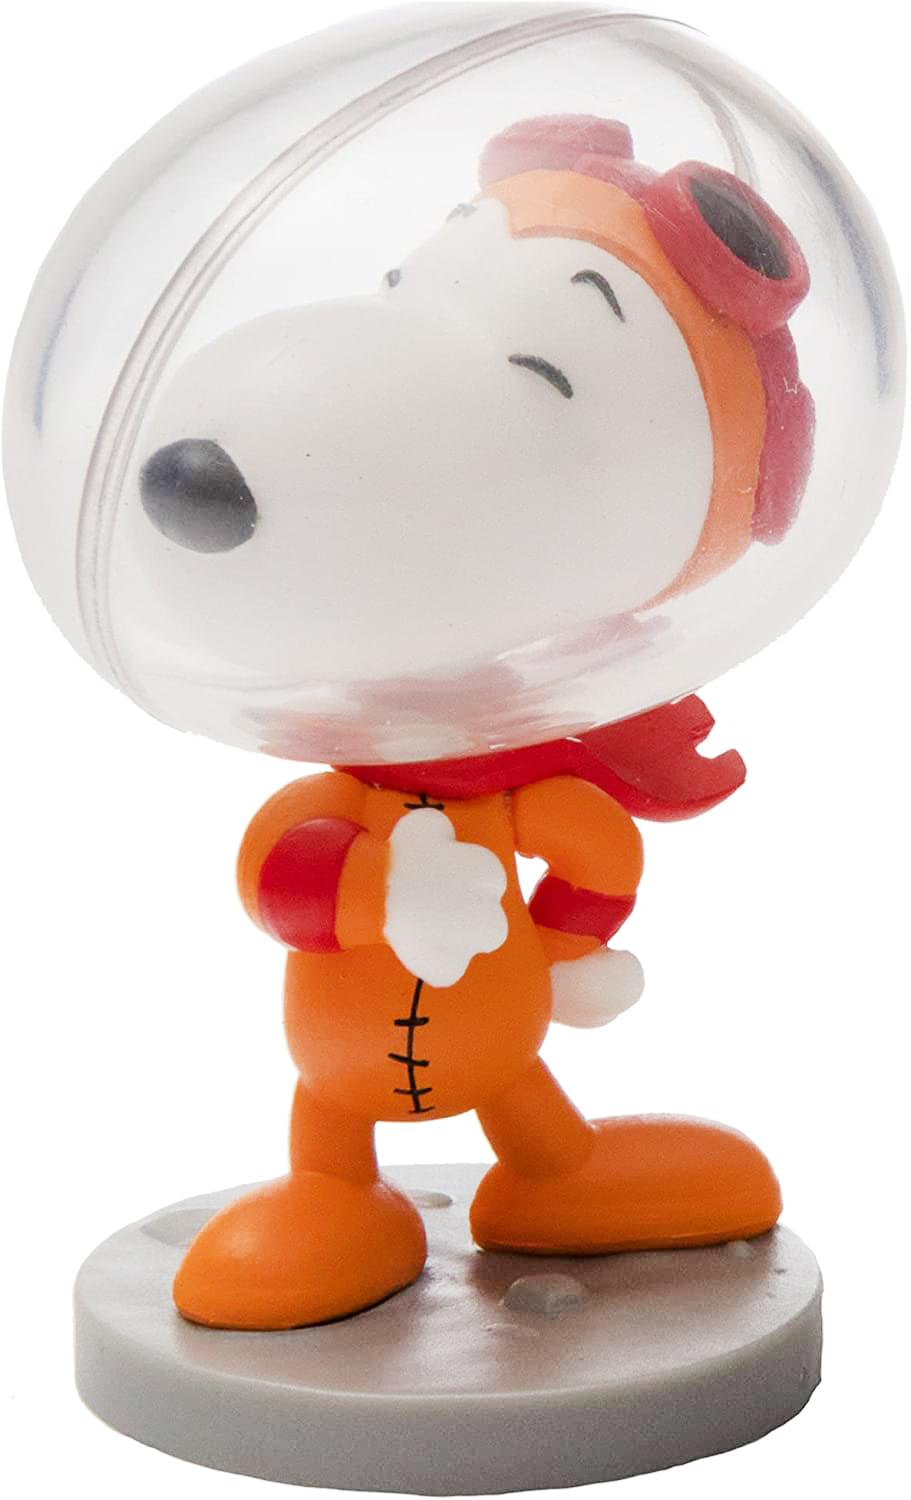  JINX Snoopy in Space Snoopy in White Astronaut Suit